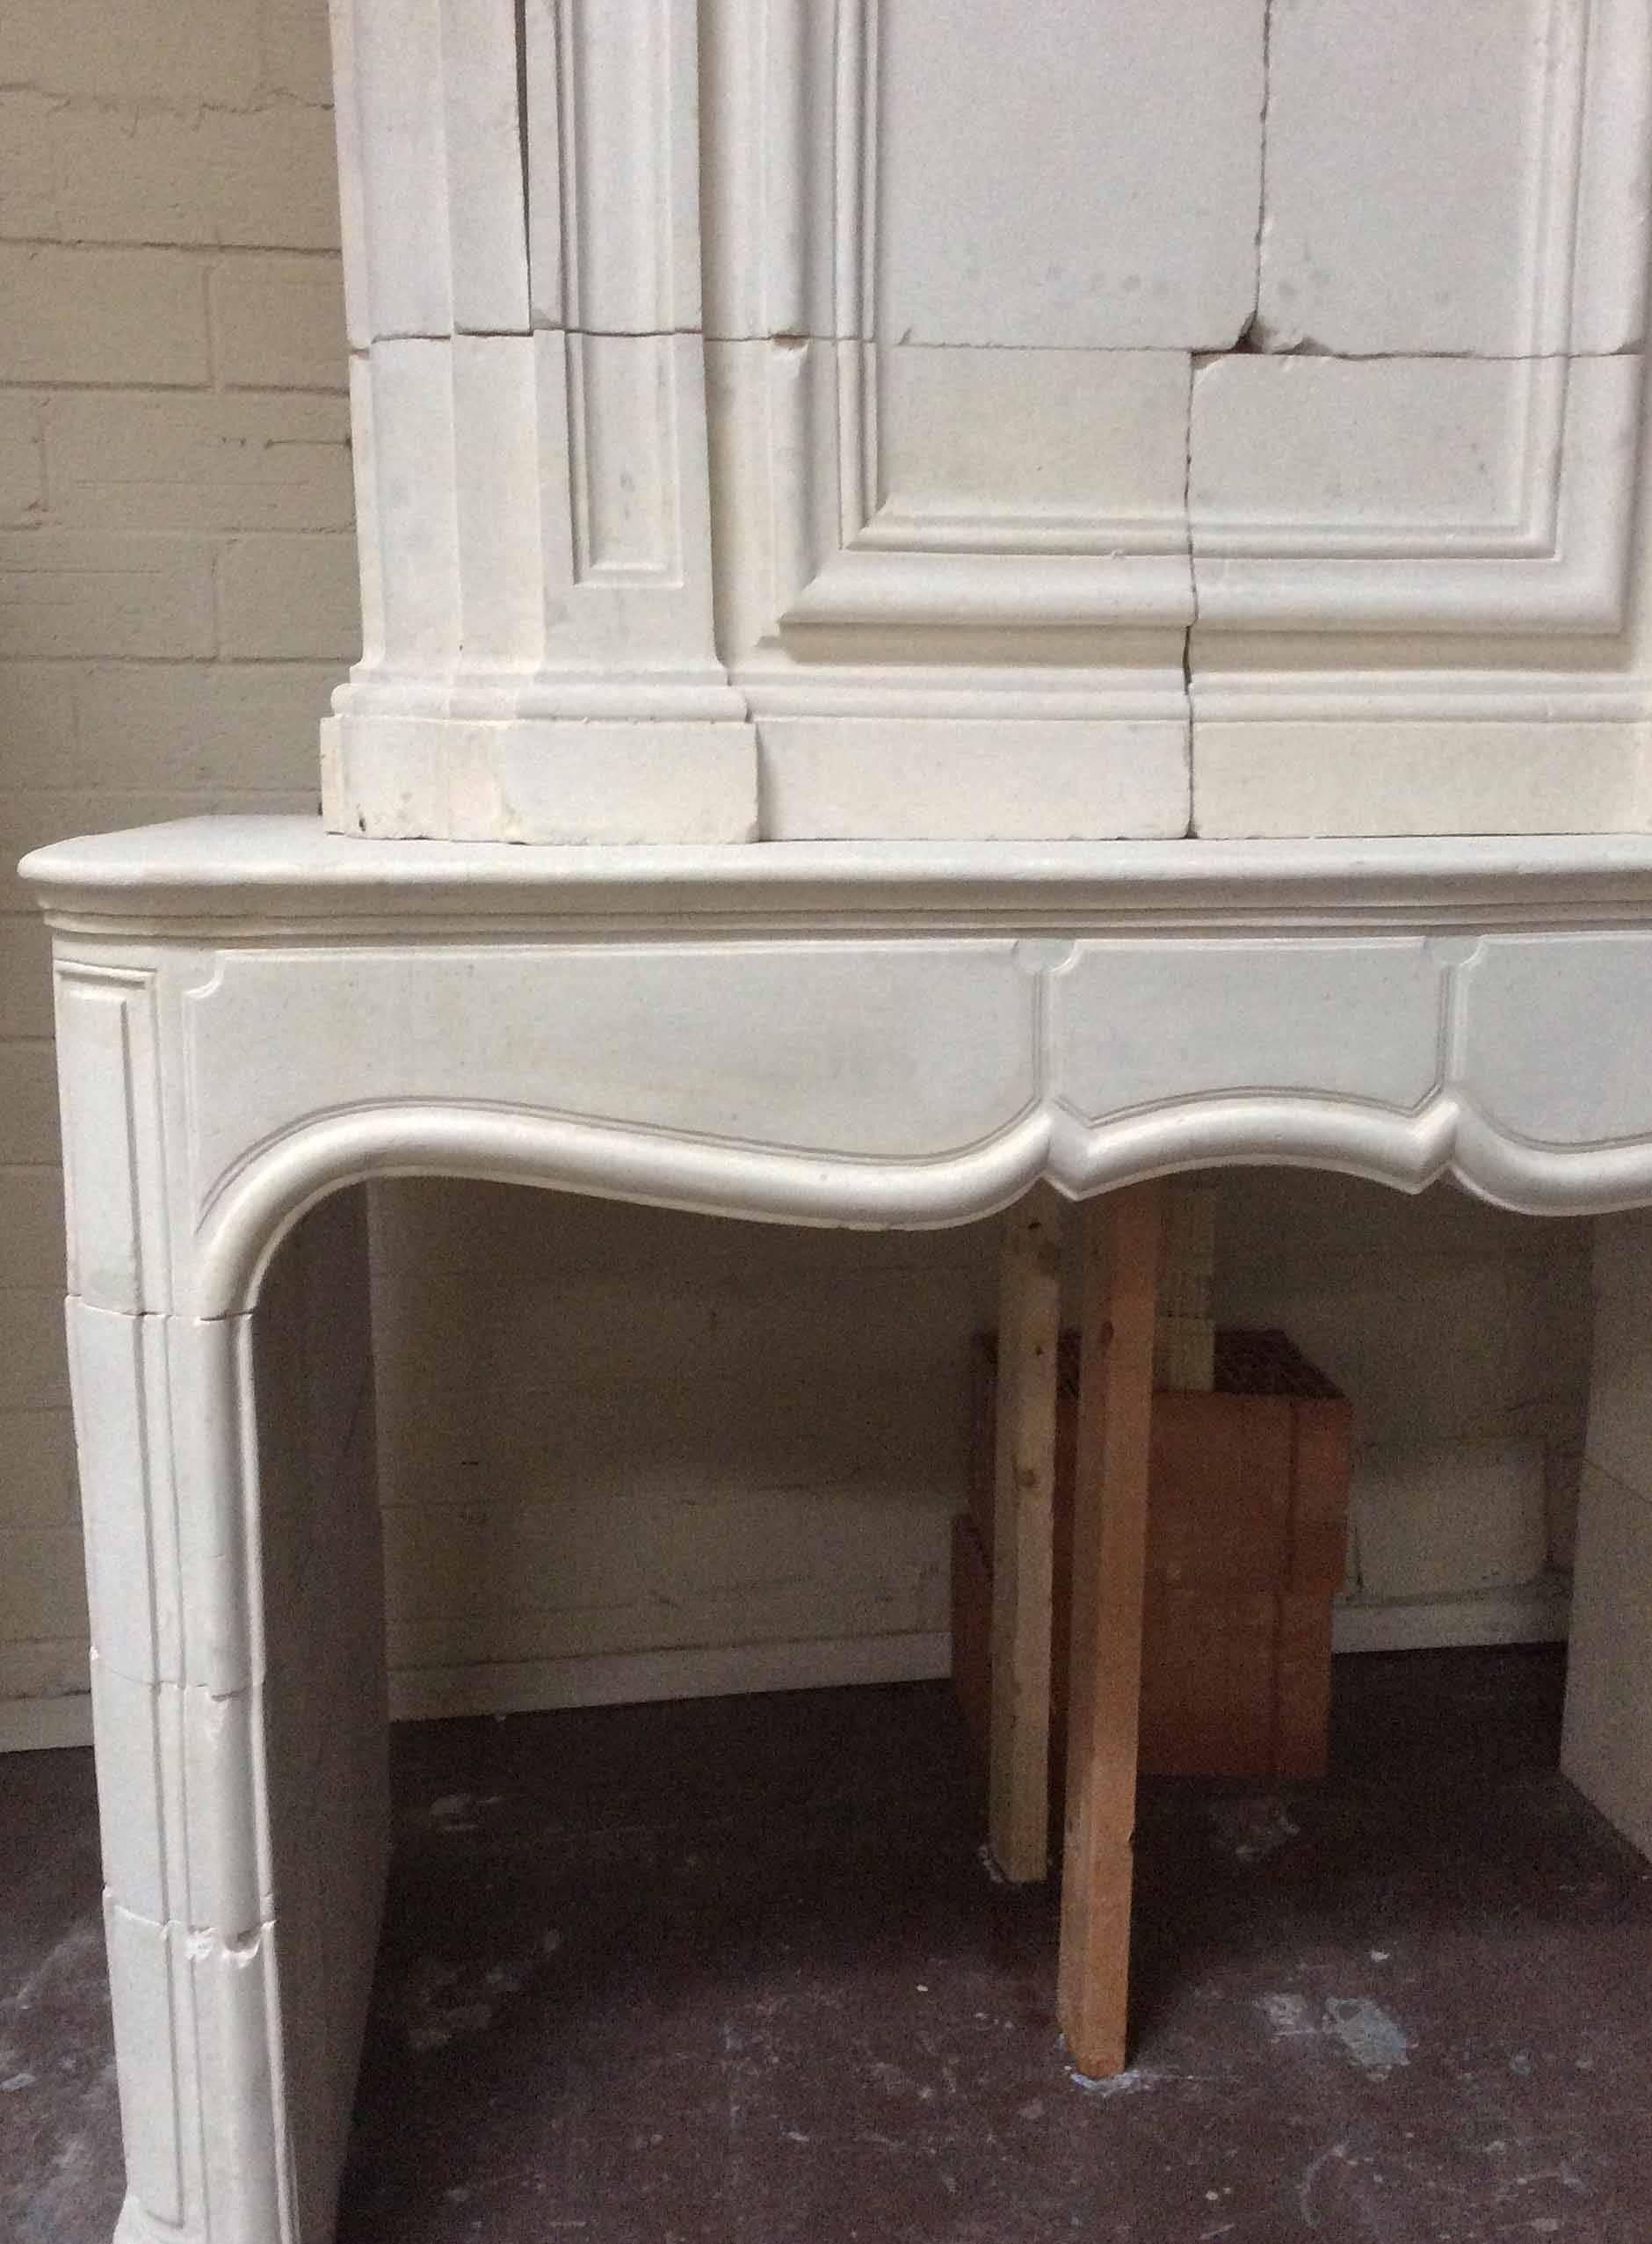 This European fireplace features a masterfully carved Trumeau and legs with a scalloped designed mantel. A wonderful piece for any living quarters.
Imported from France, circa 1750. The firebox is 50.50